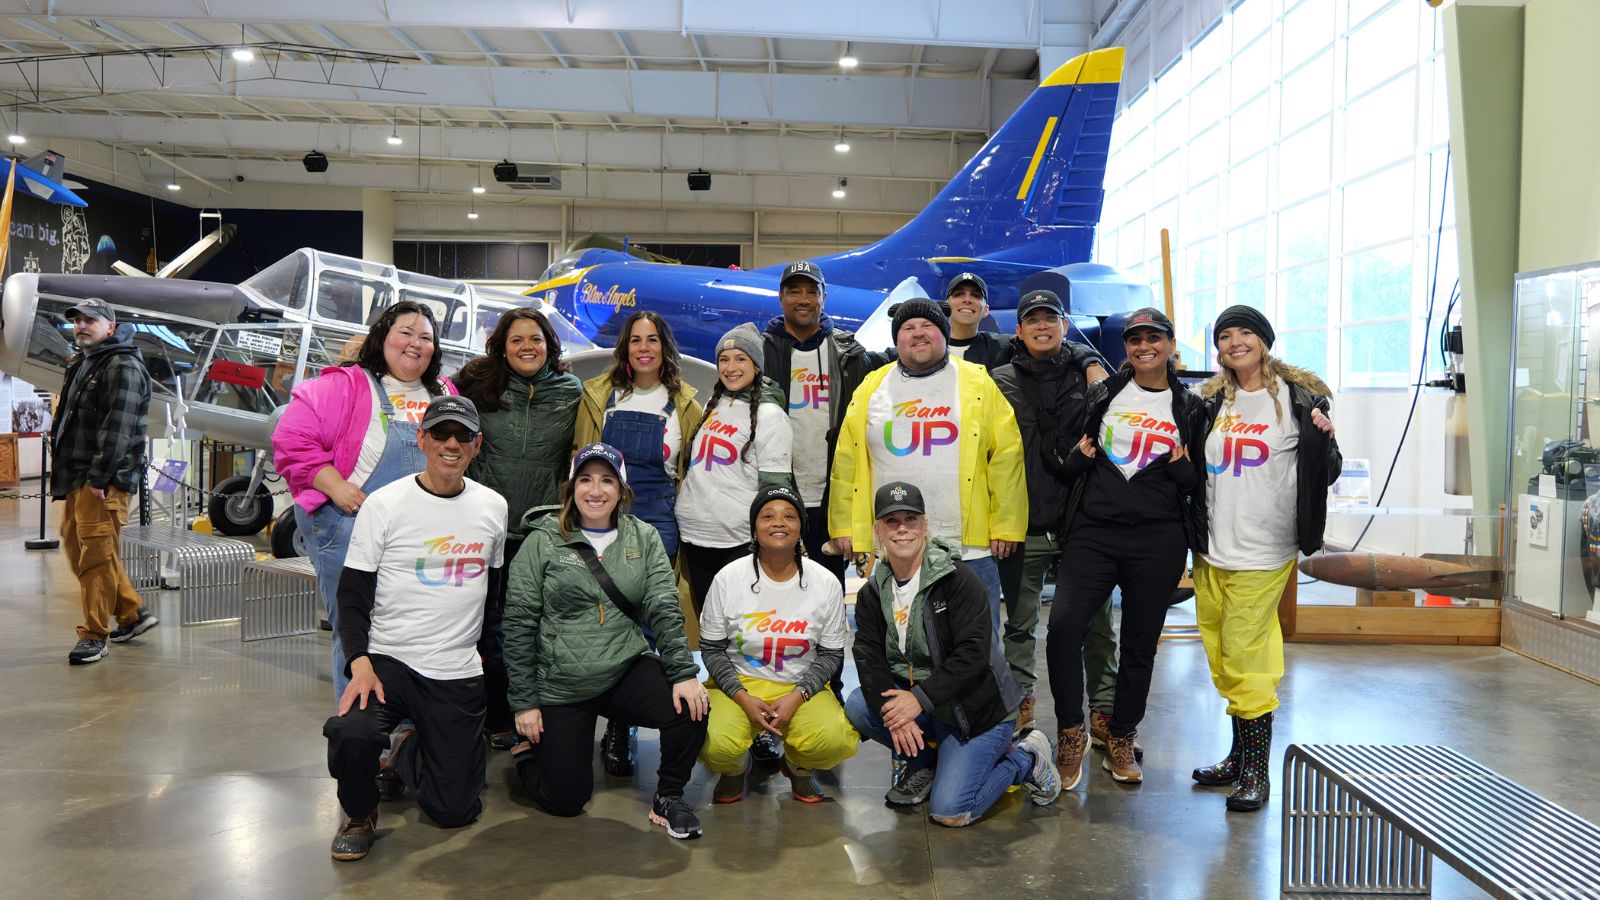 Team UP Soars into Spring Service at the Aerospace Museum of California